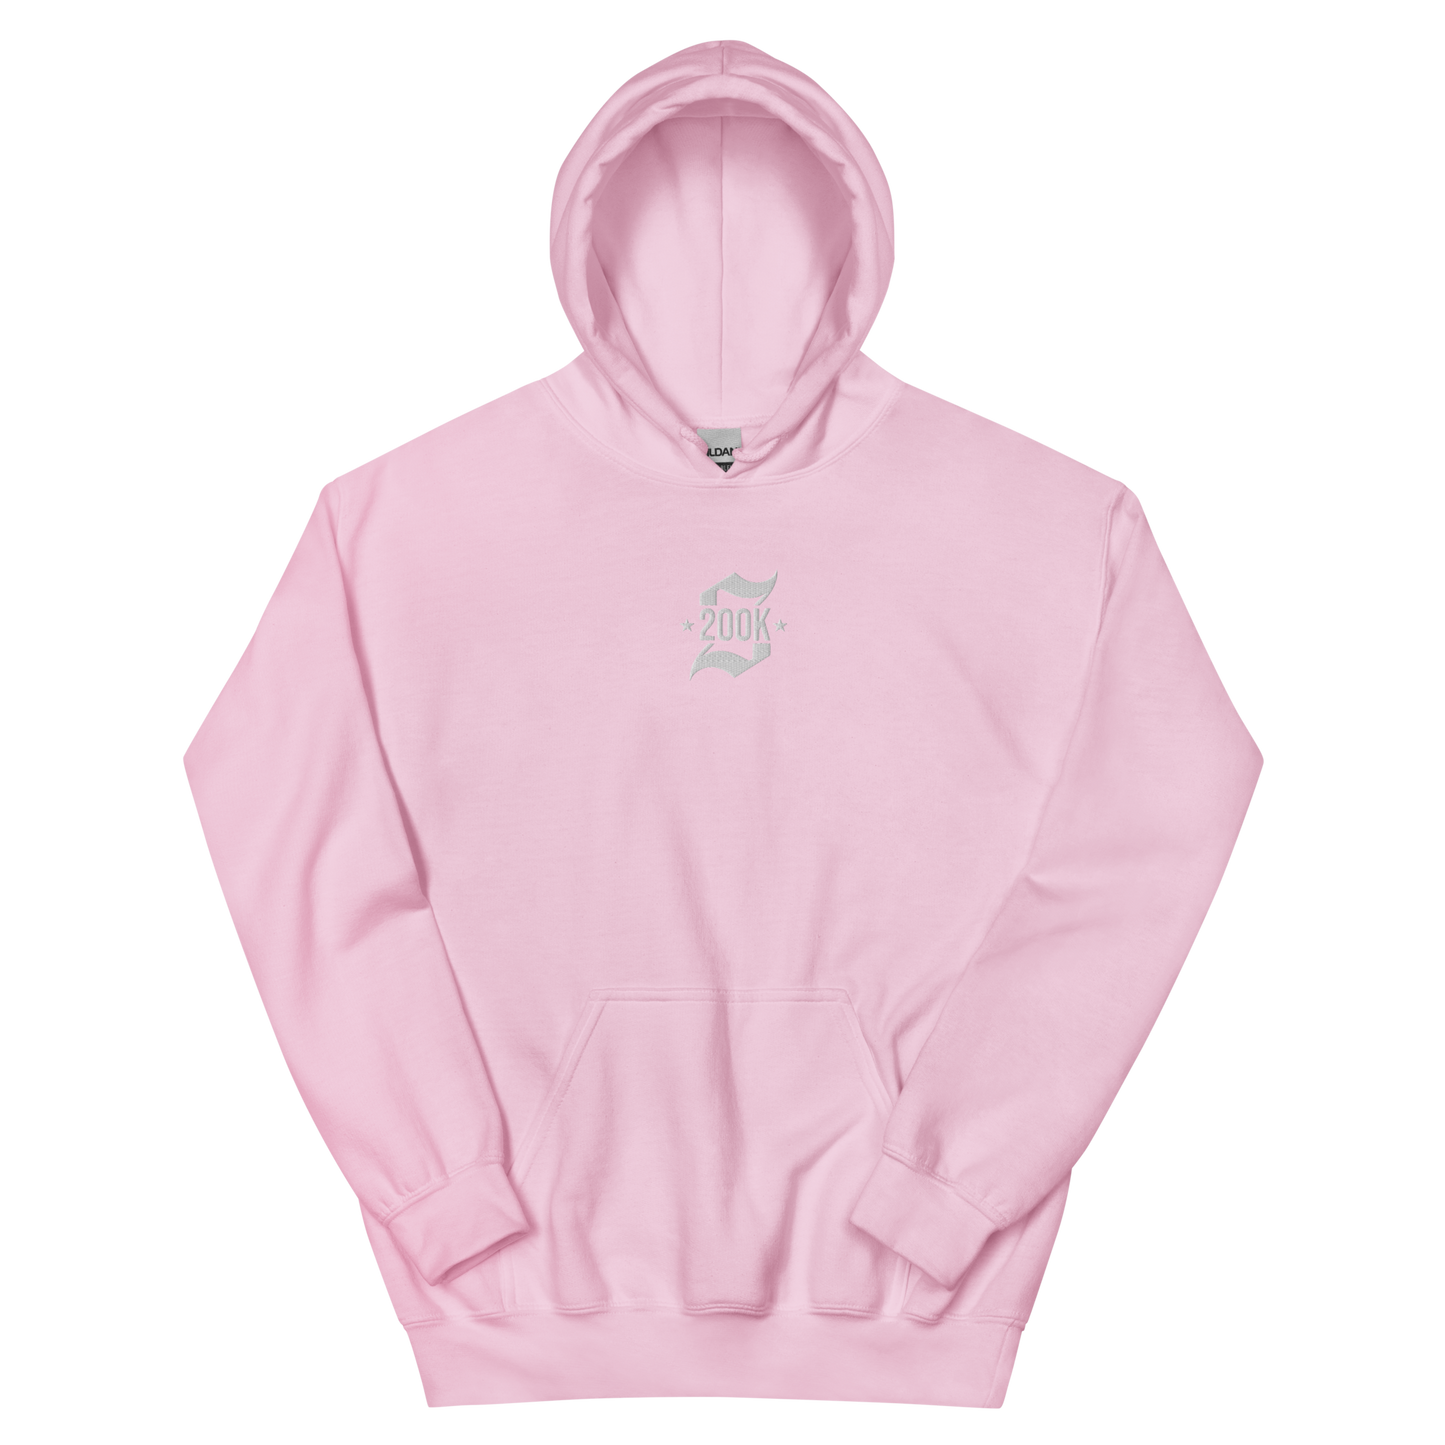 shots 200K Hoodie (Pink / Embroidered)